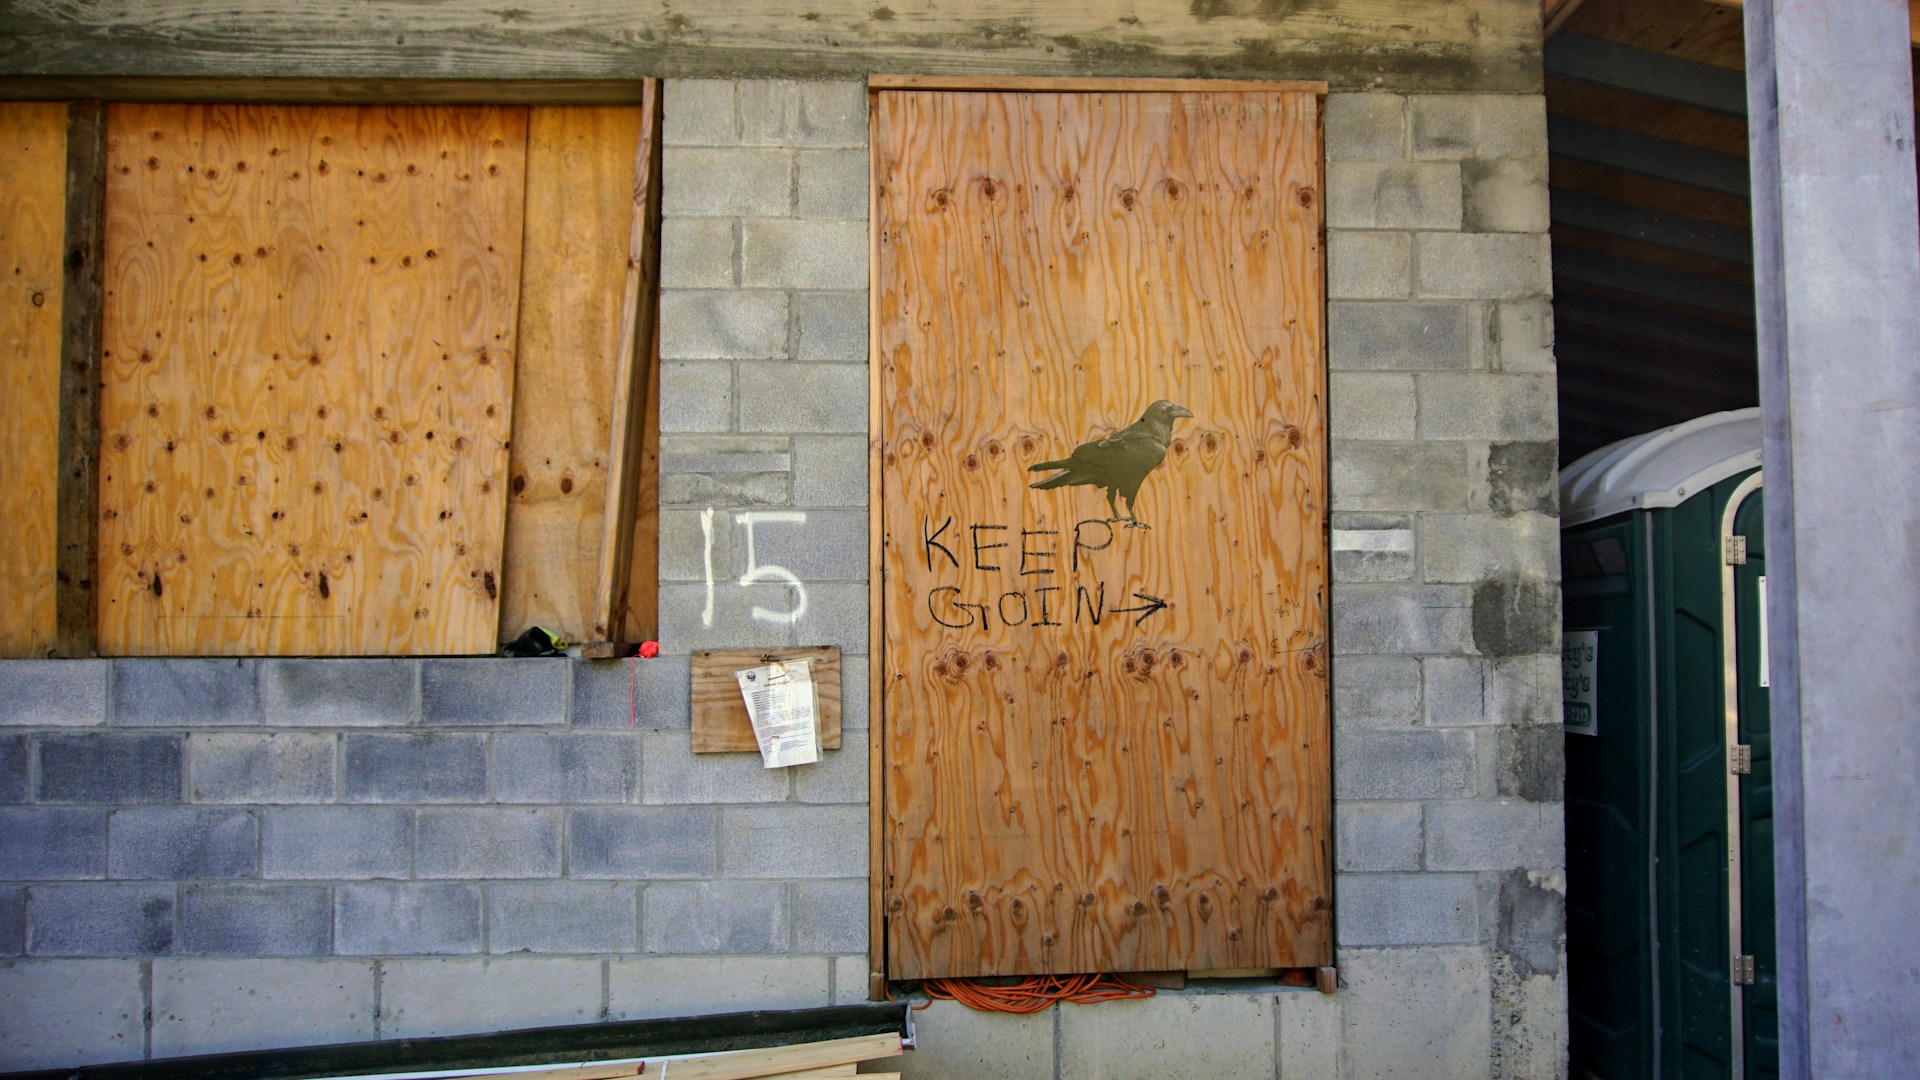 Image shows a boarded up building to illustrate what happens when a publishing company closes.